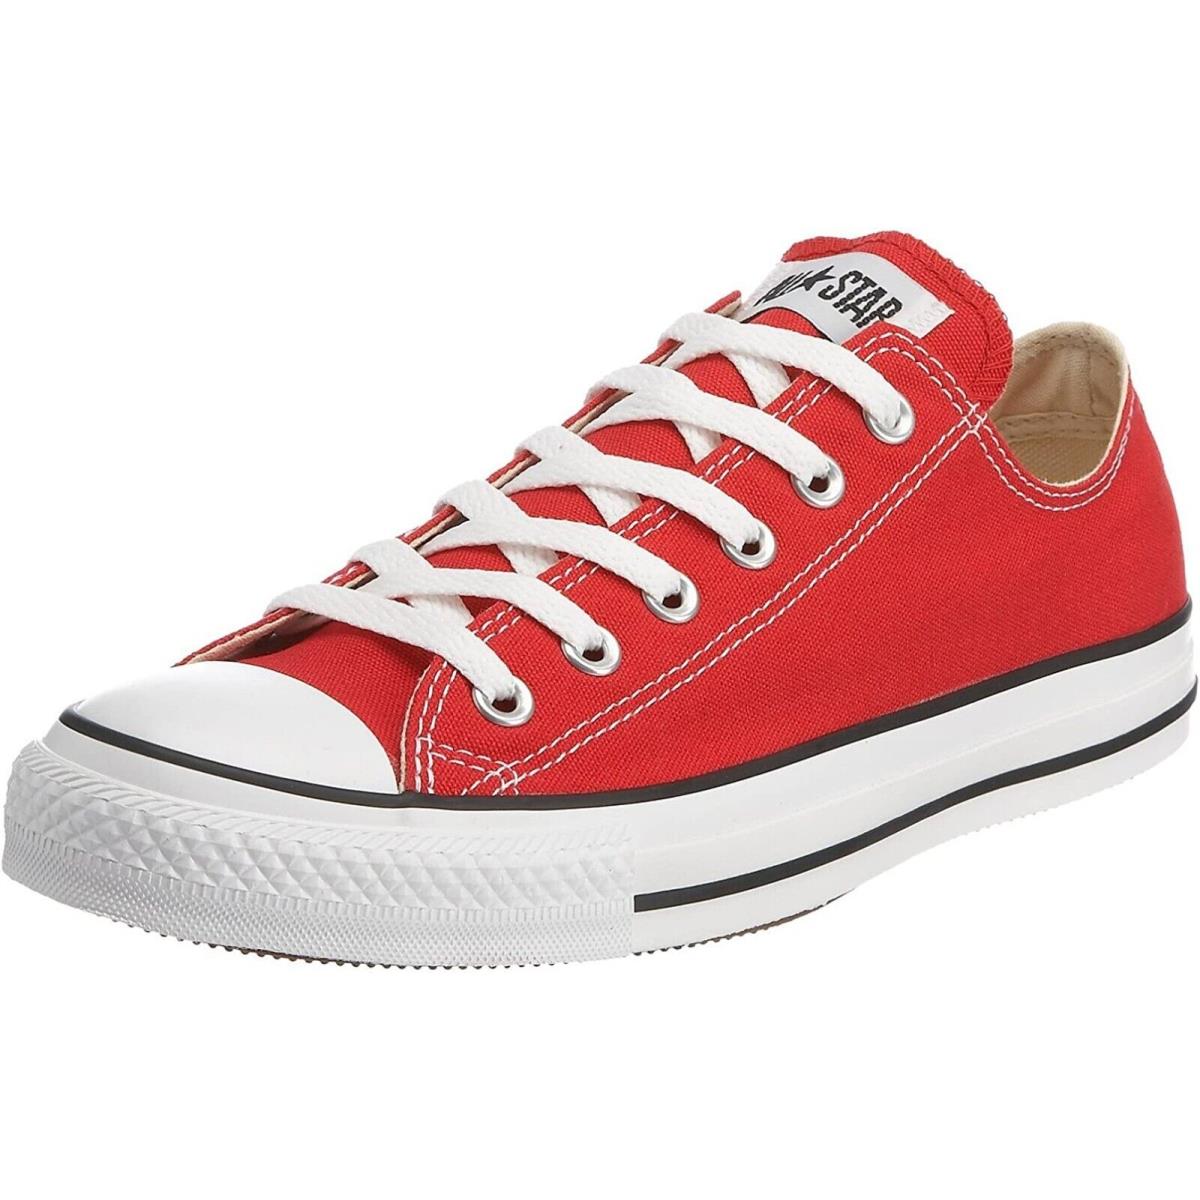 Converse Chuck Taylor All Star Classic Low Top Canvas Red White Men Size 8 Shoe - Red